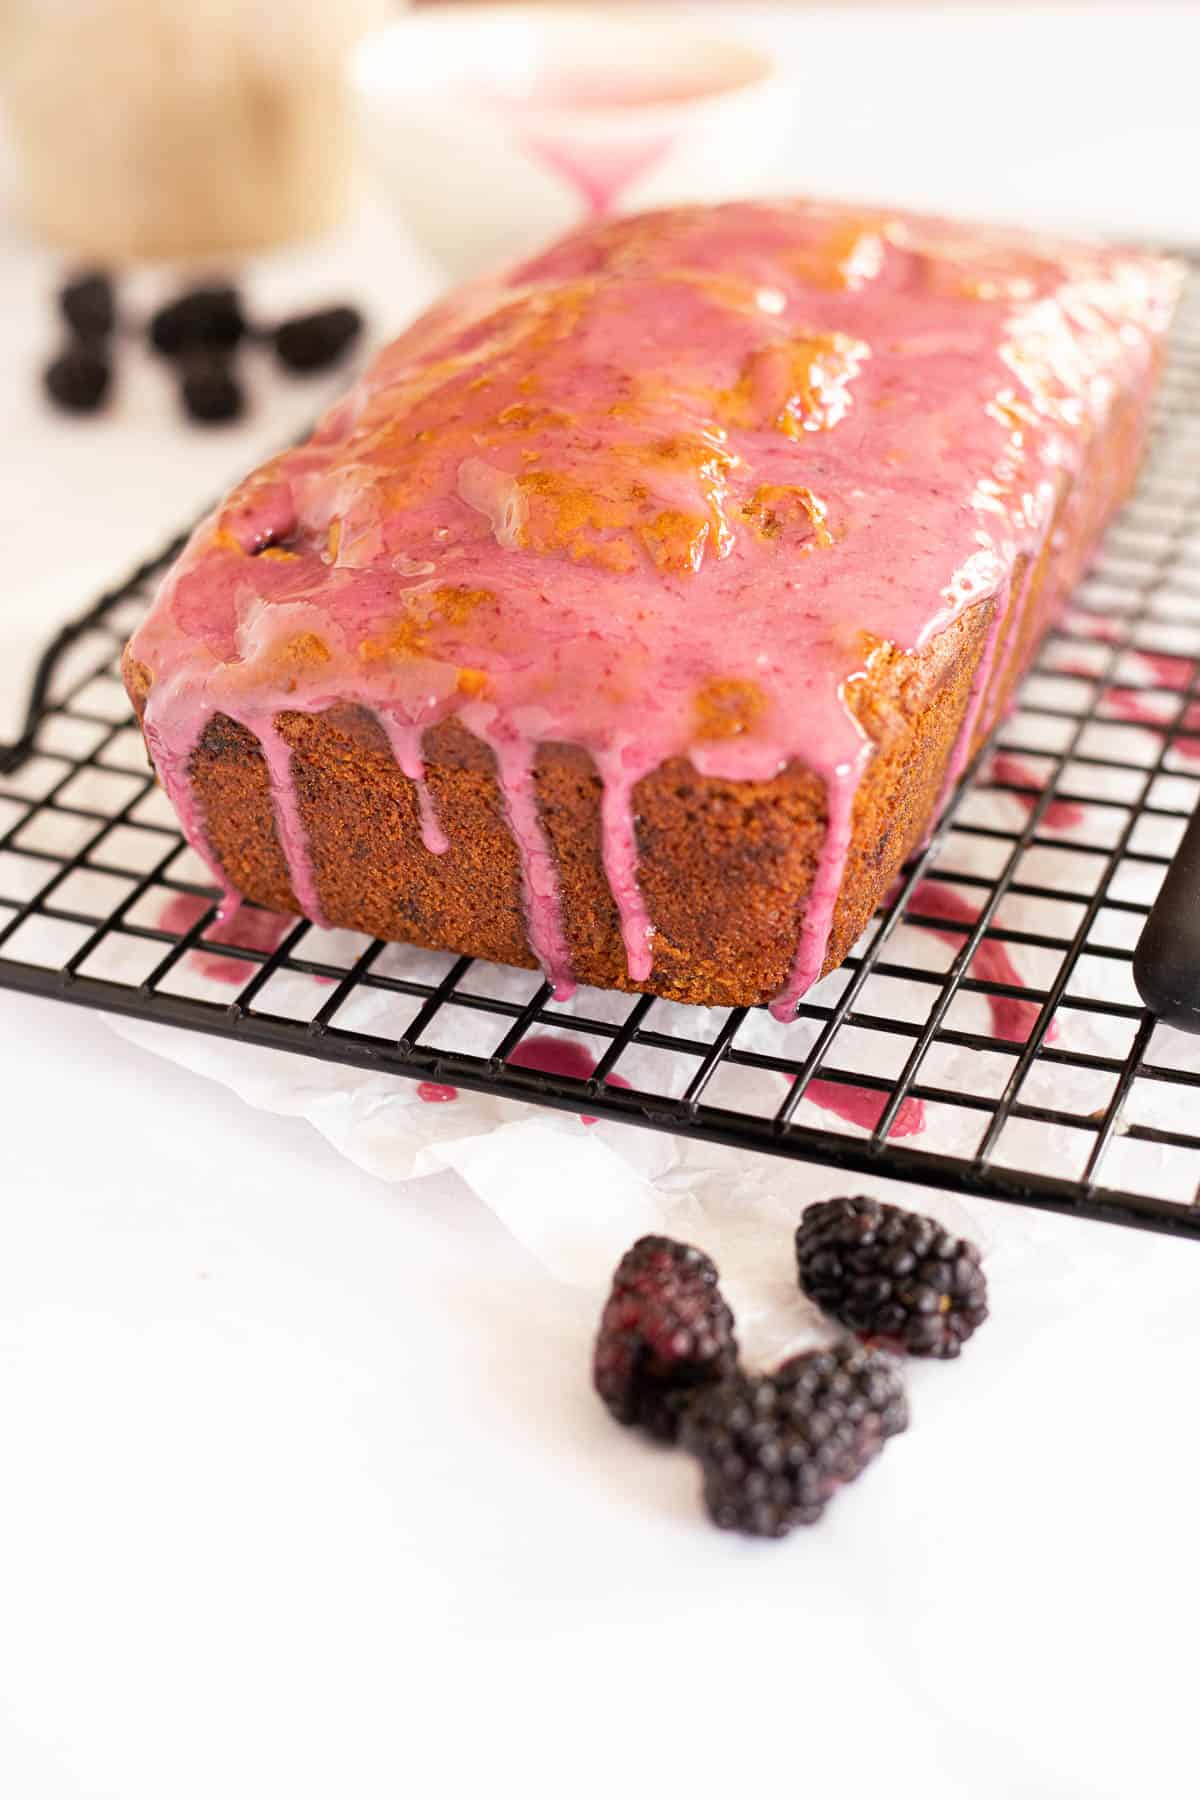 banana bread with a pink blackberry glaze dripping down the sides on a black wire rack.